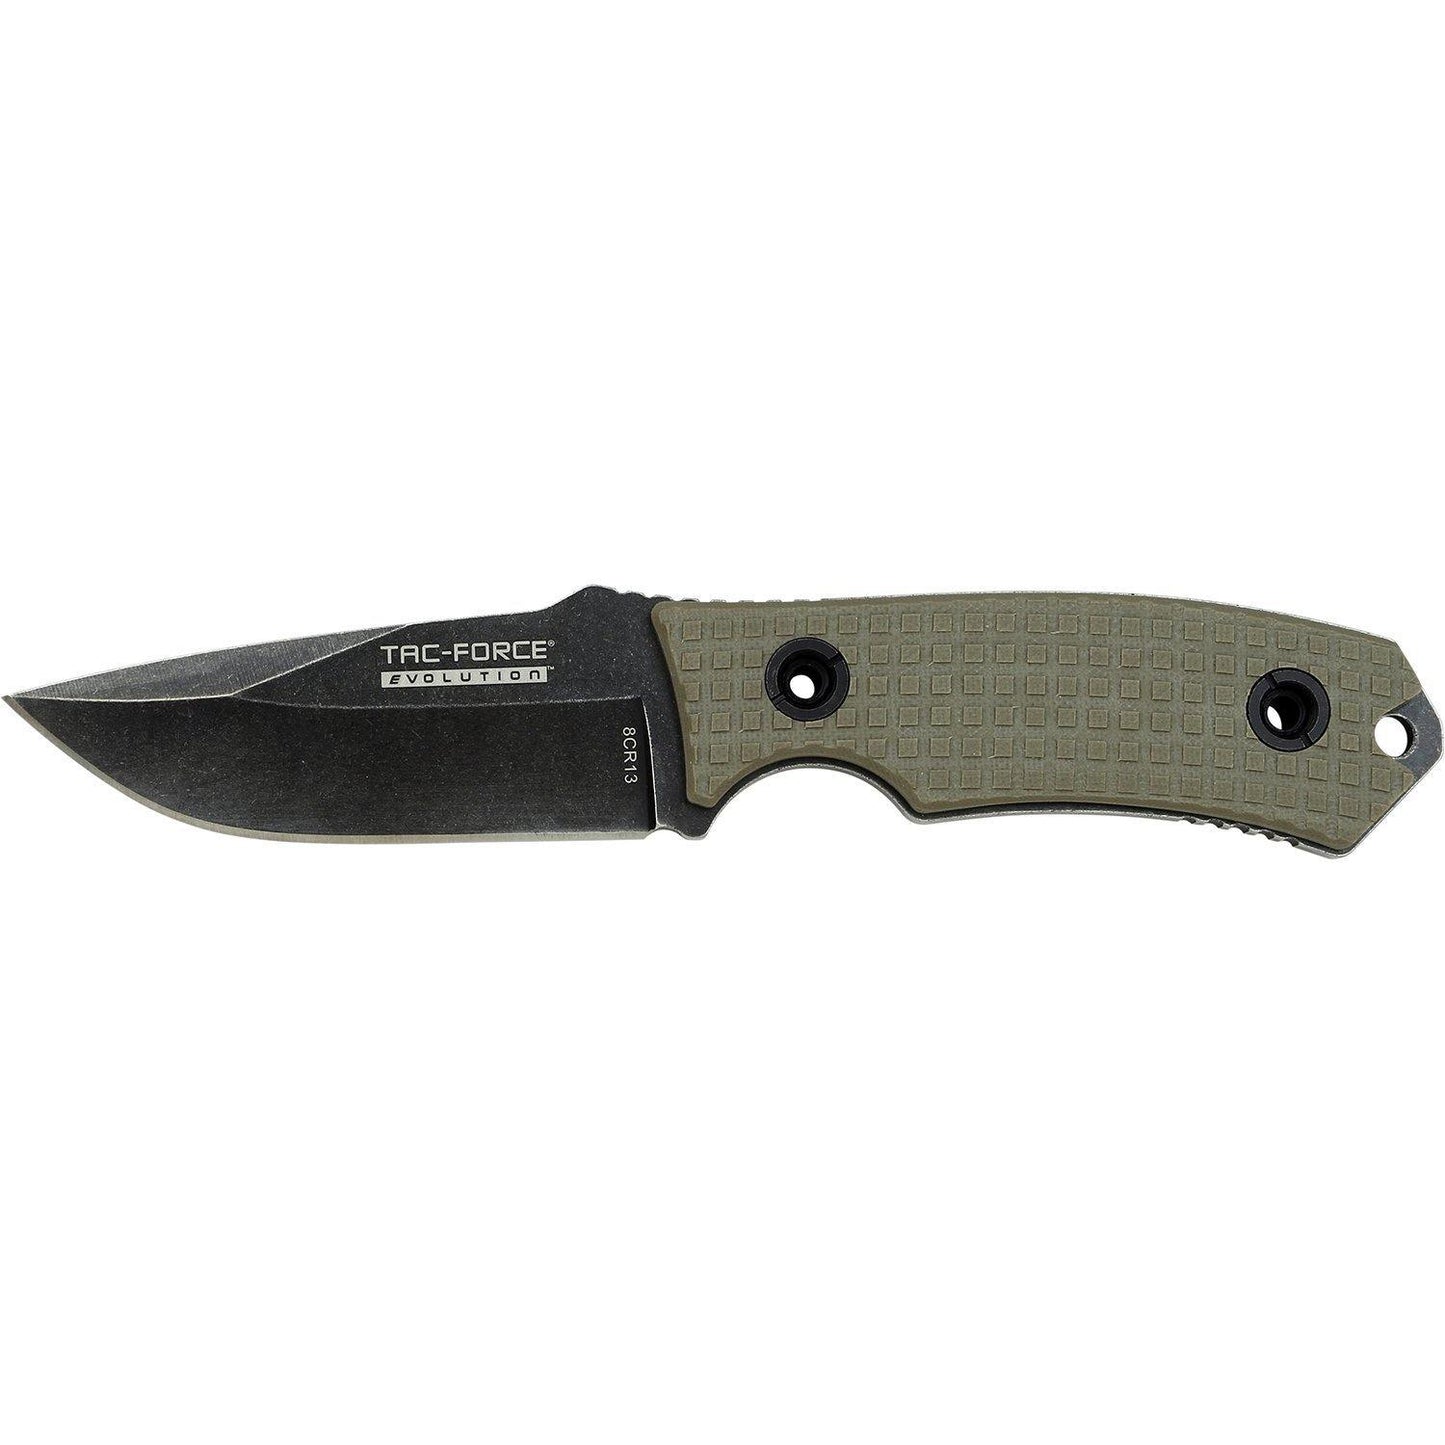 Tac-Force Evolution Tanto Stonewashed Fixed Blade Knife - 8 Inches Overall G10 Handle #tfe-Fix002-Tn - Xhunter New Zealand